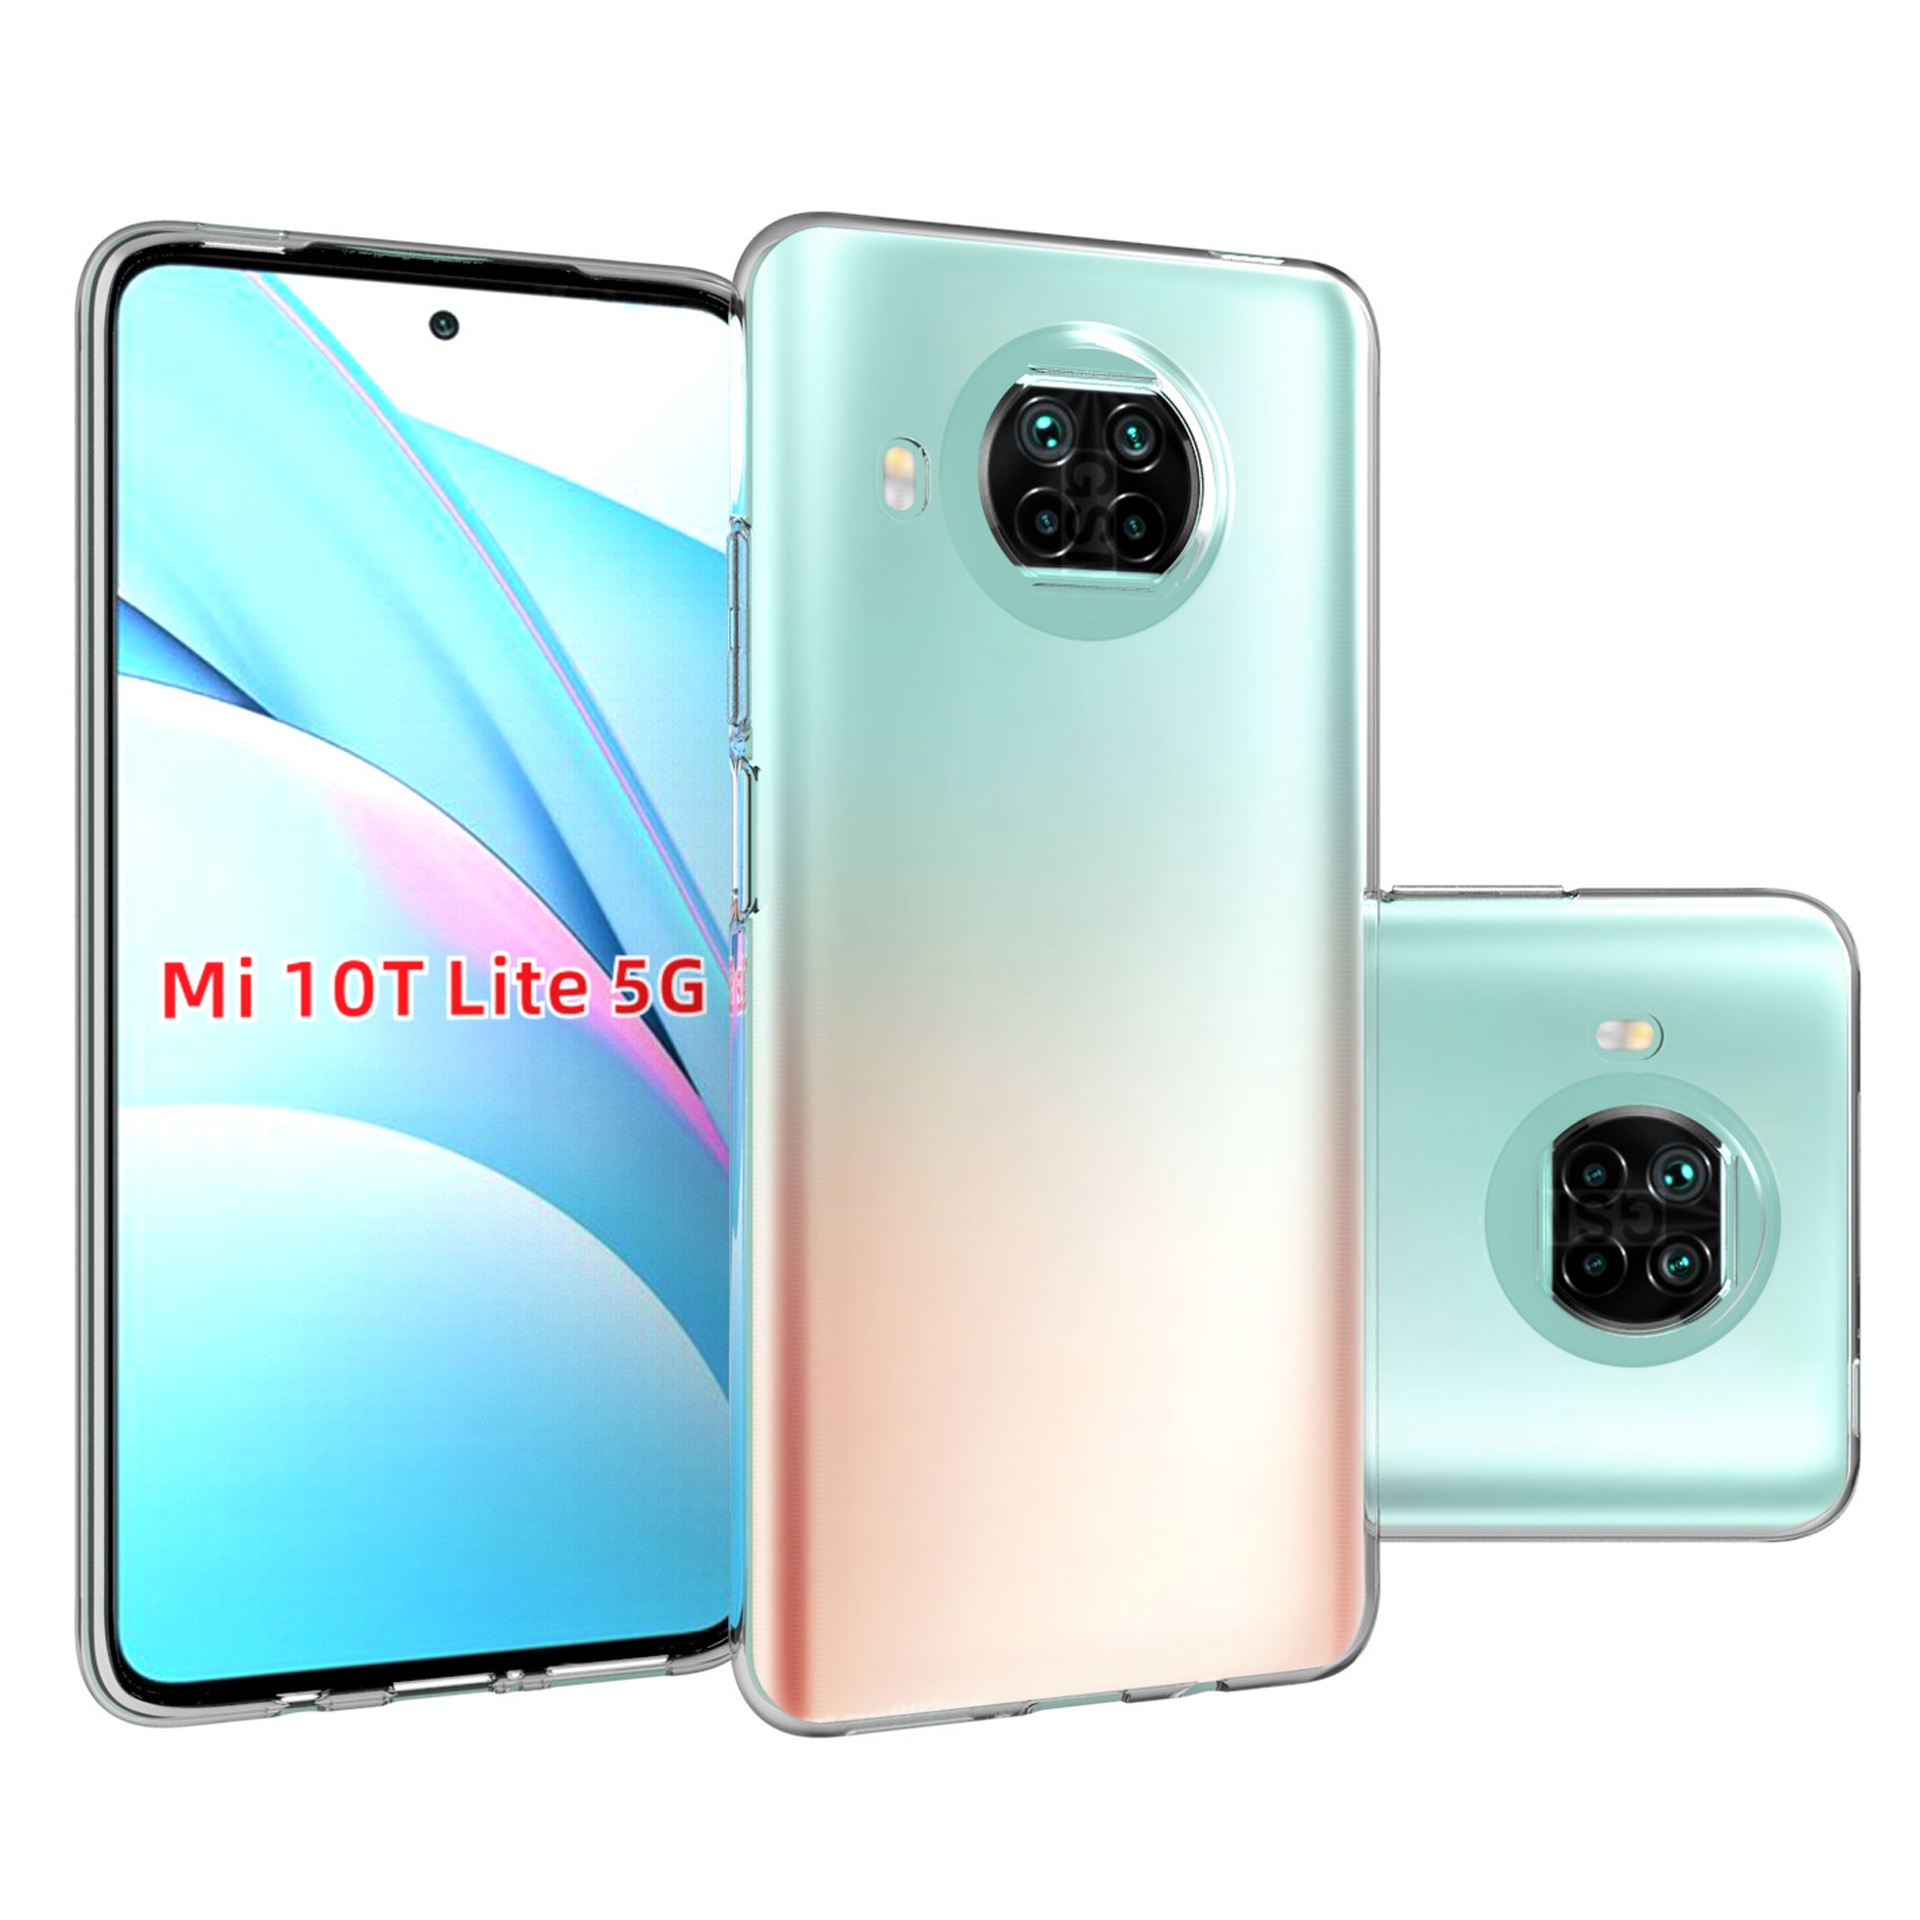 Bakeey-for-Xiaomi-Mi-10T-Lite-5G--Redmi-Note-9-Pro-5G-Case-Crystal-Clear-Transparent-Ultra-Thin-Non--1790619-1